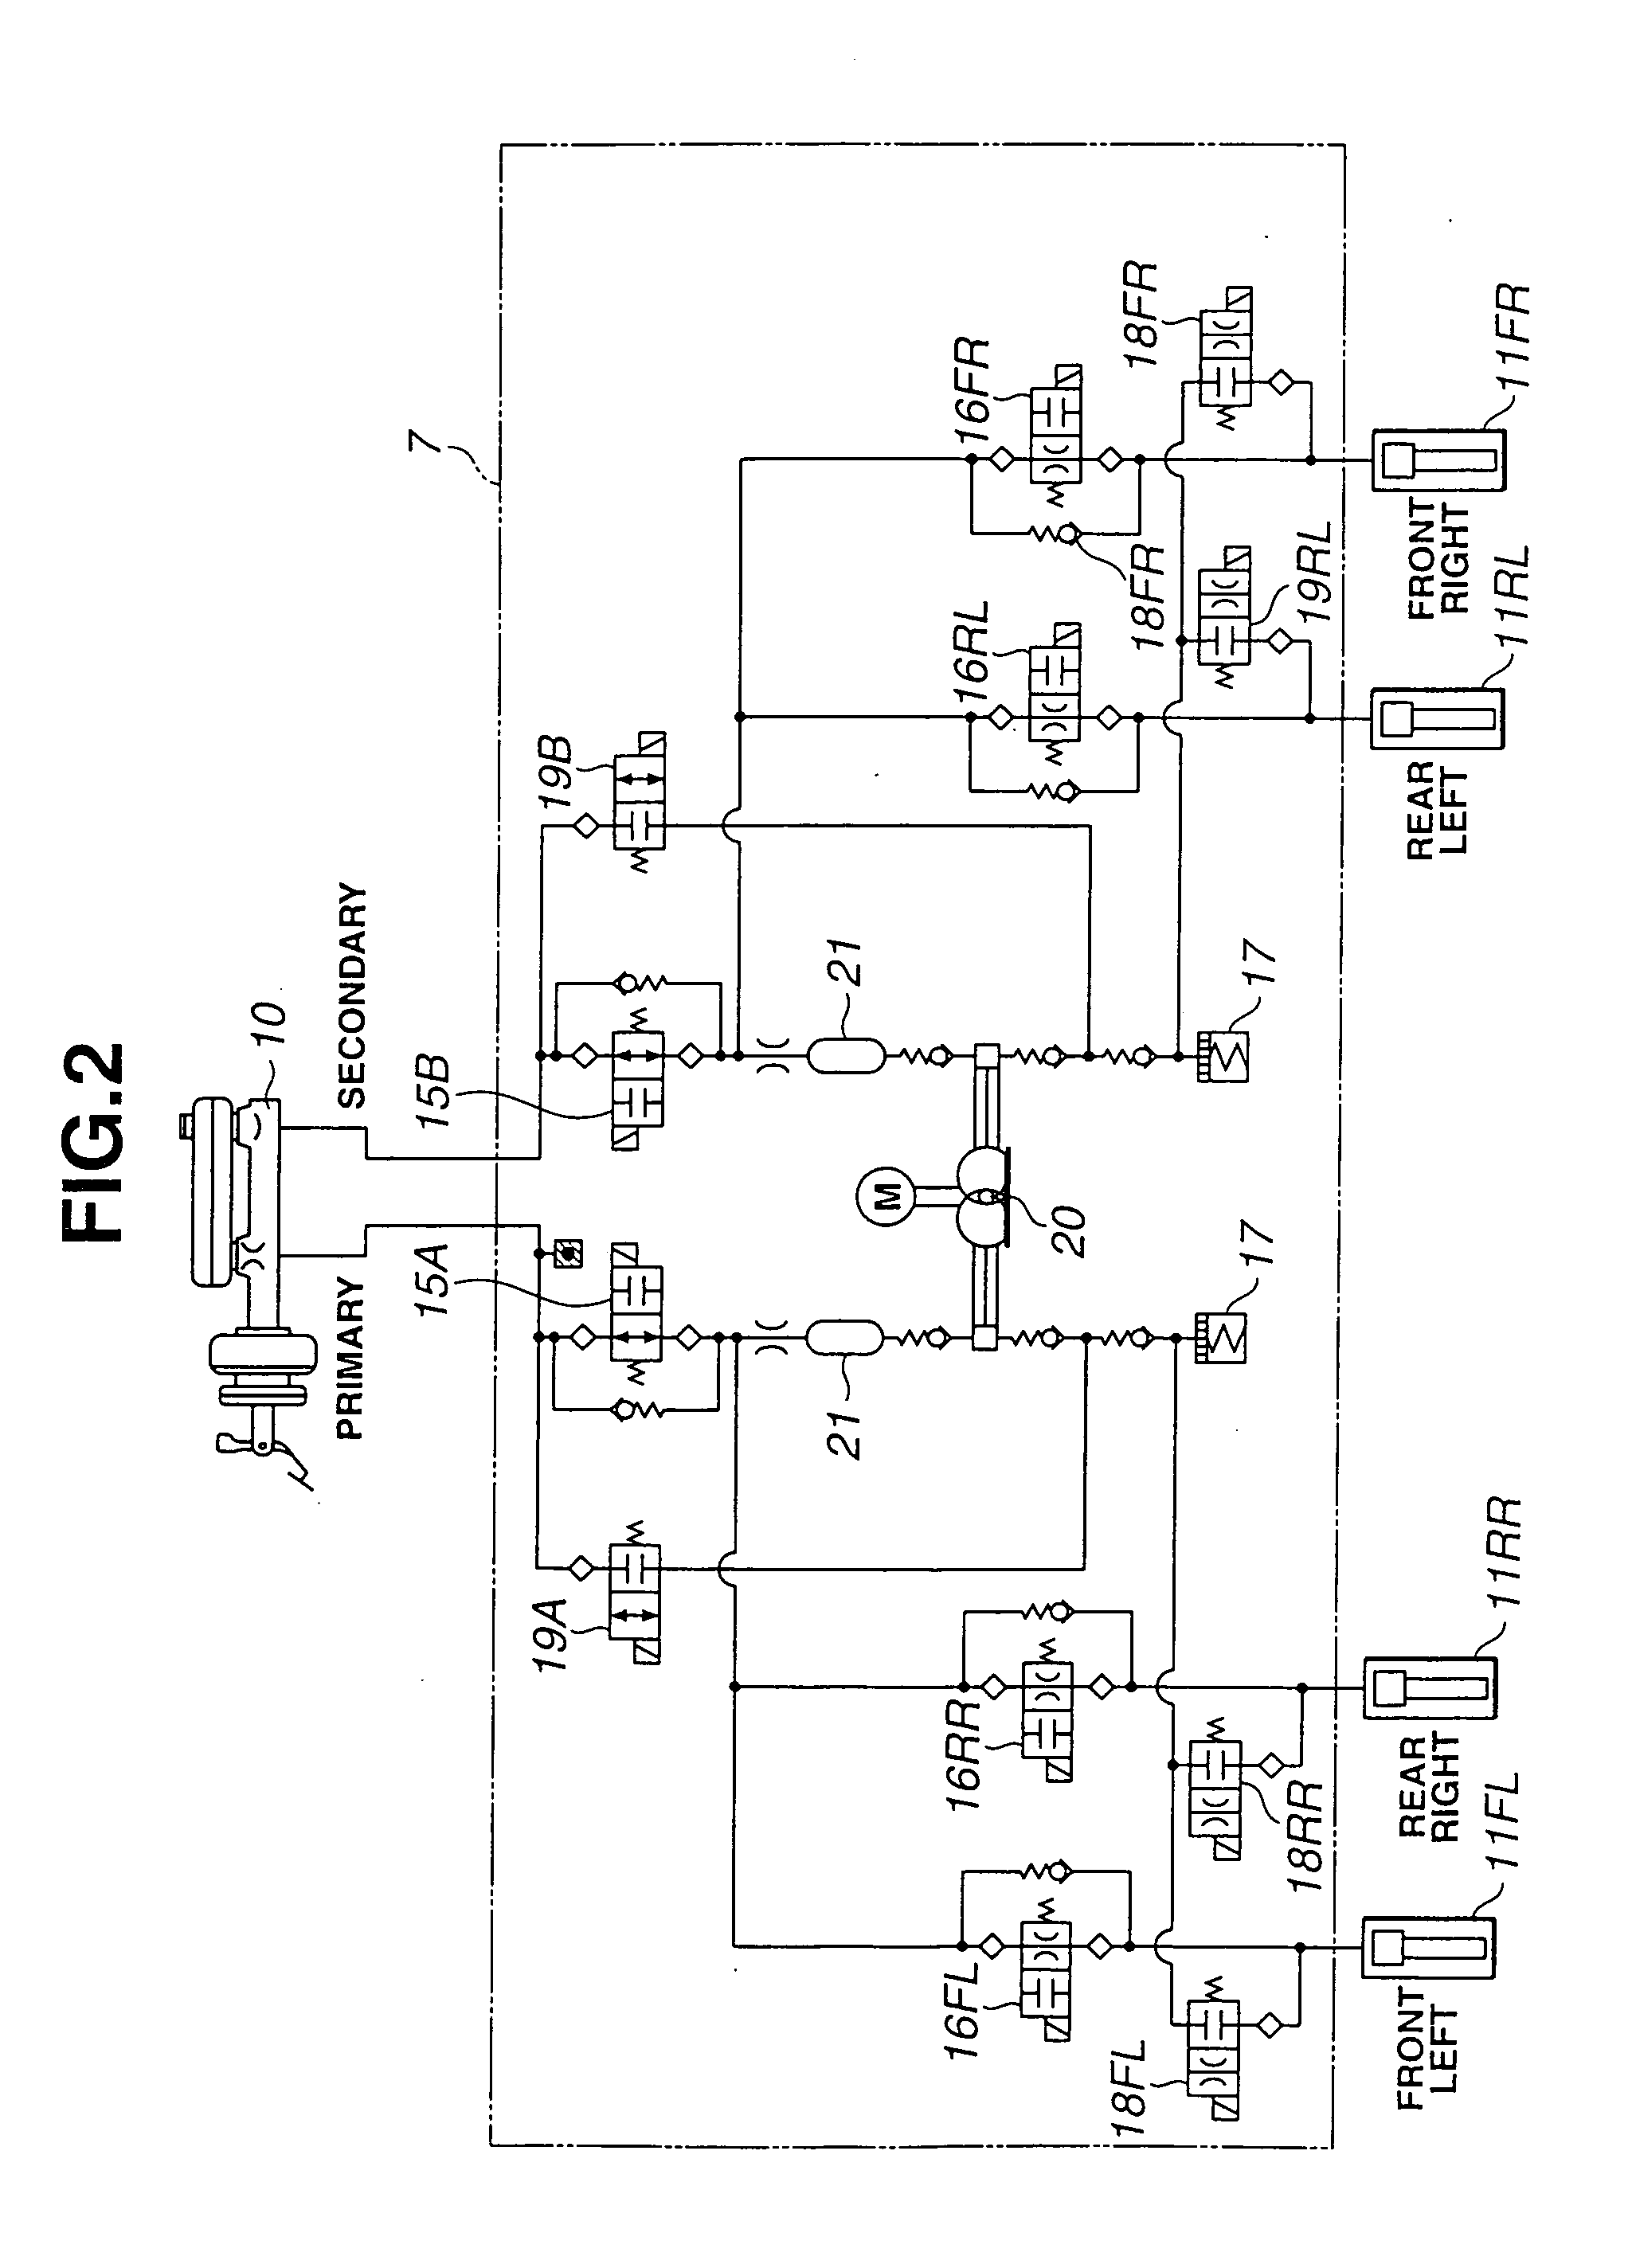 Turning motion control for vehicle